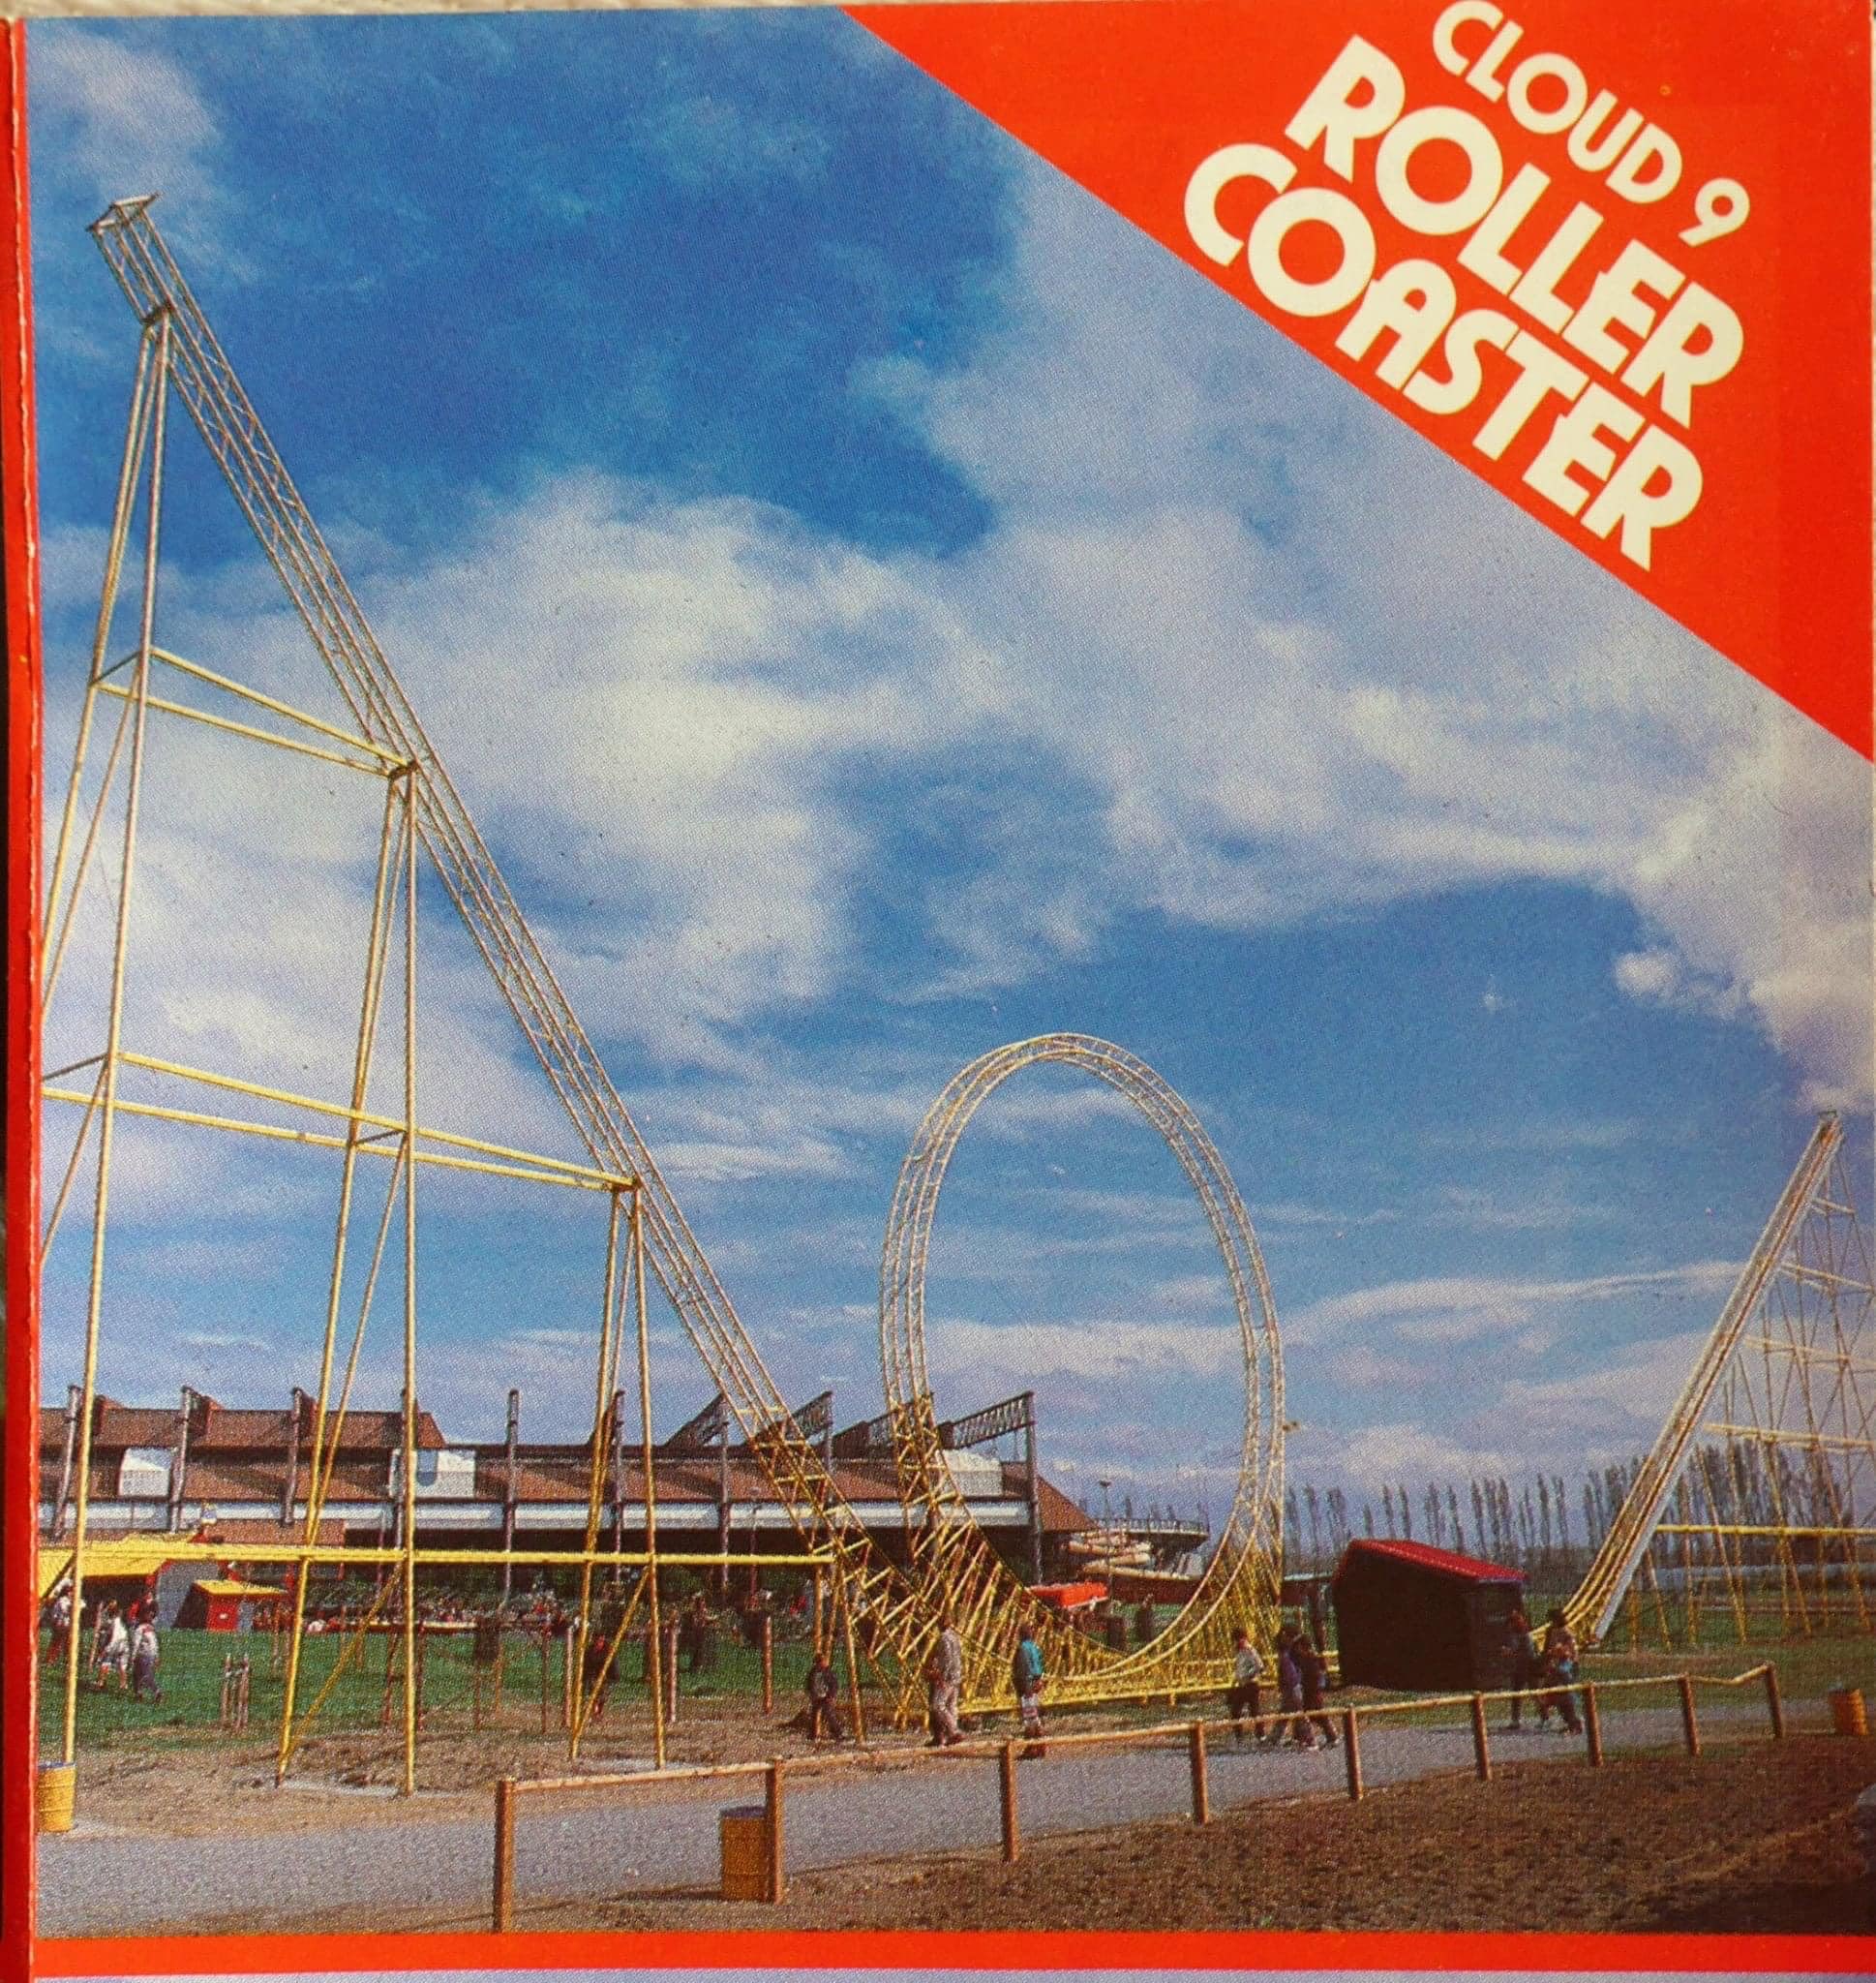 Solved The Roller Coaster DataBase ( rcdb,com) contains